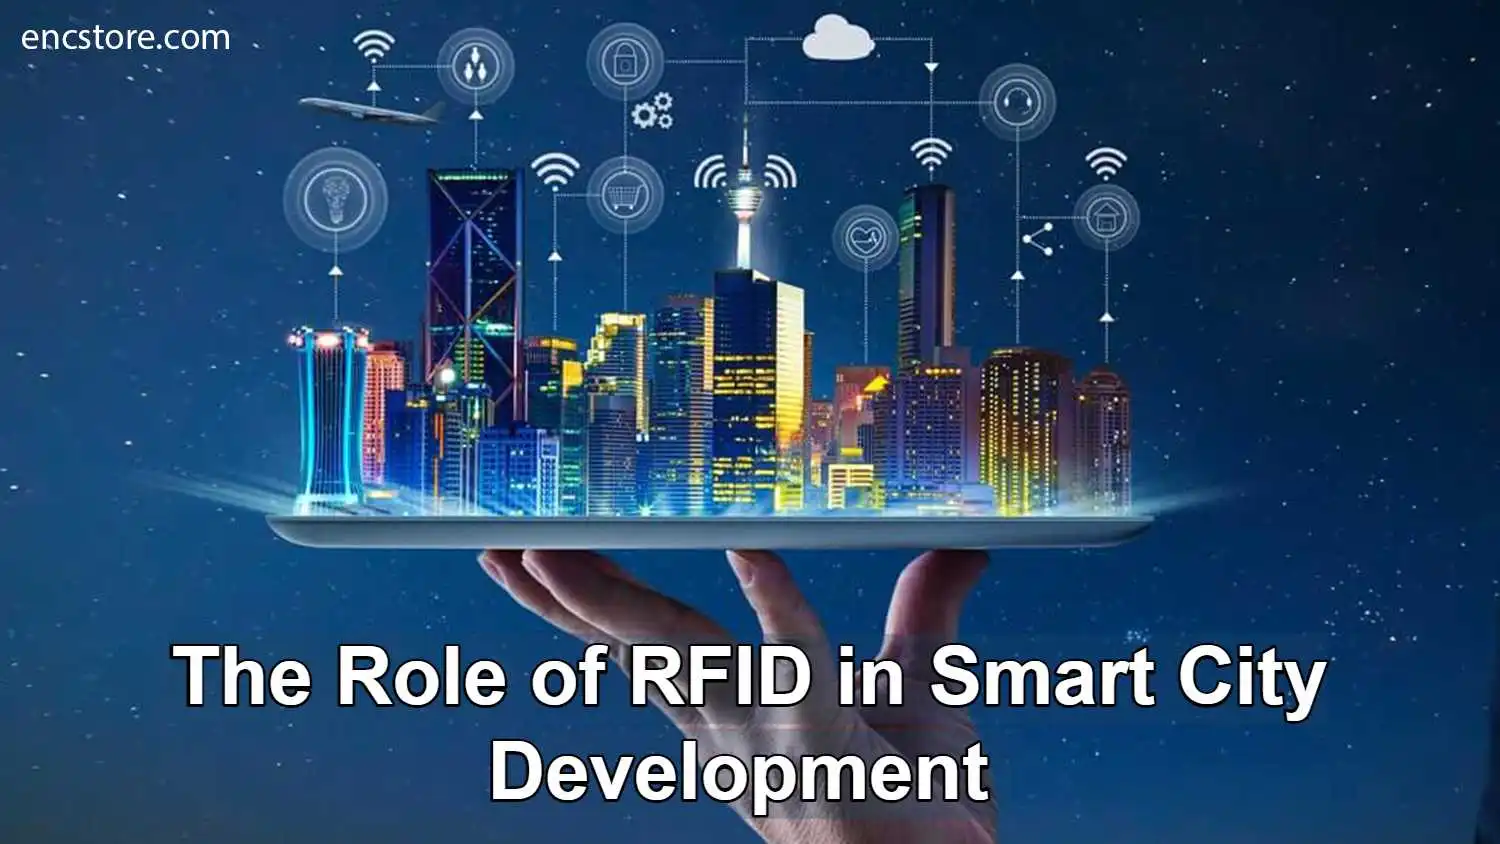 The Role of RFID in Smart City Development